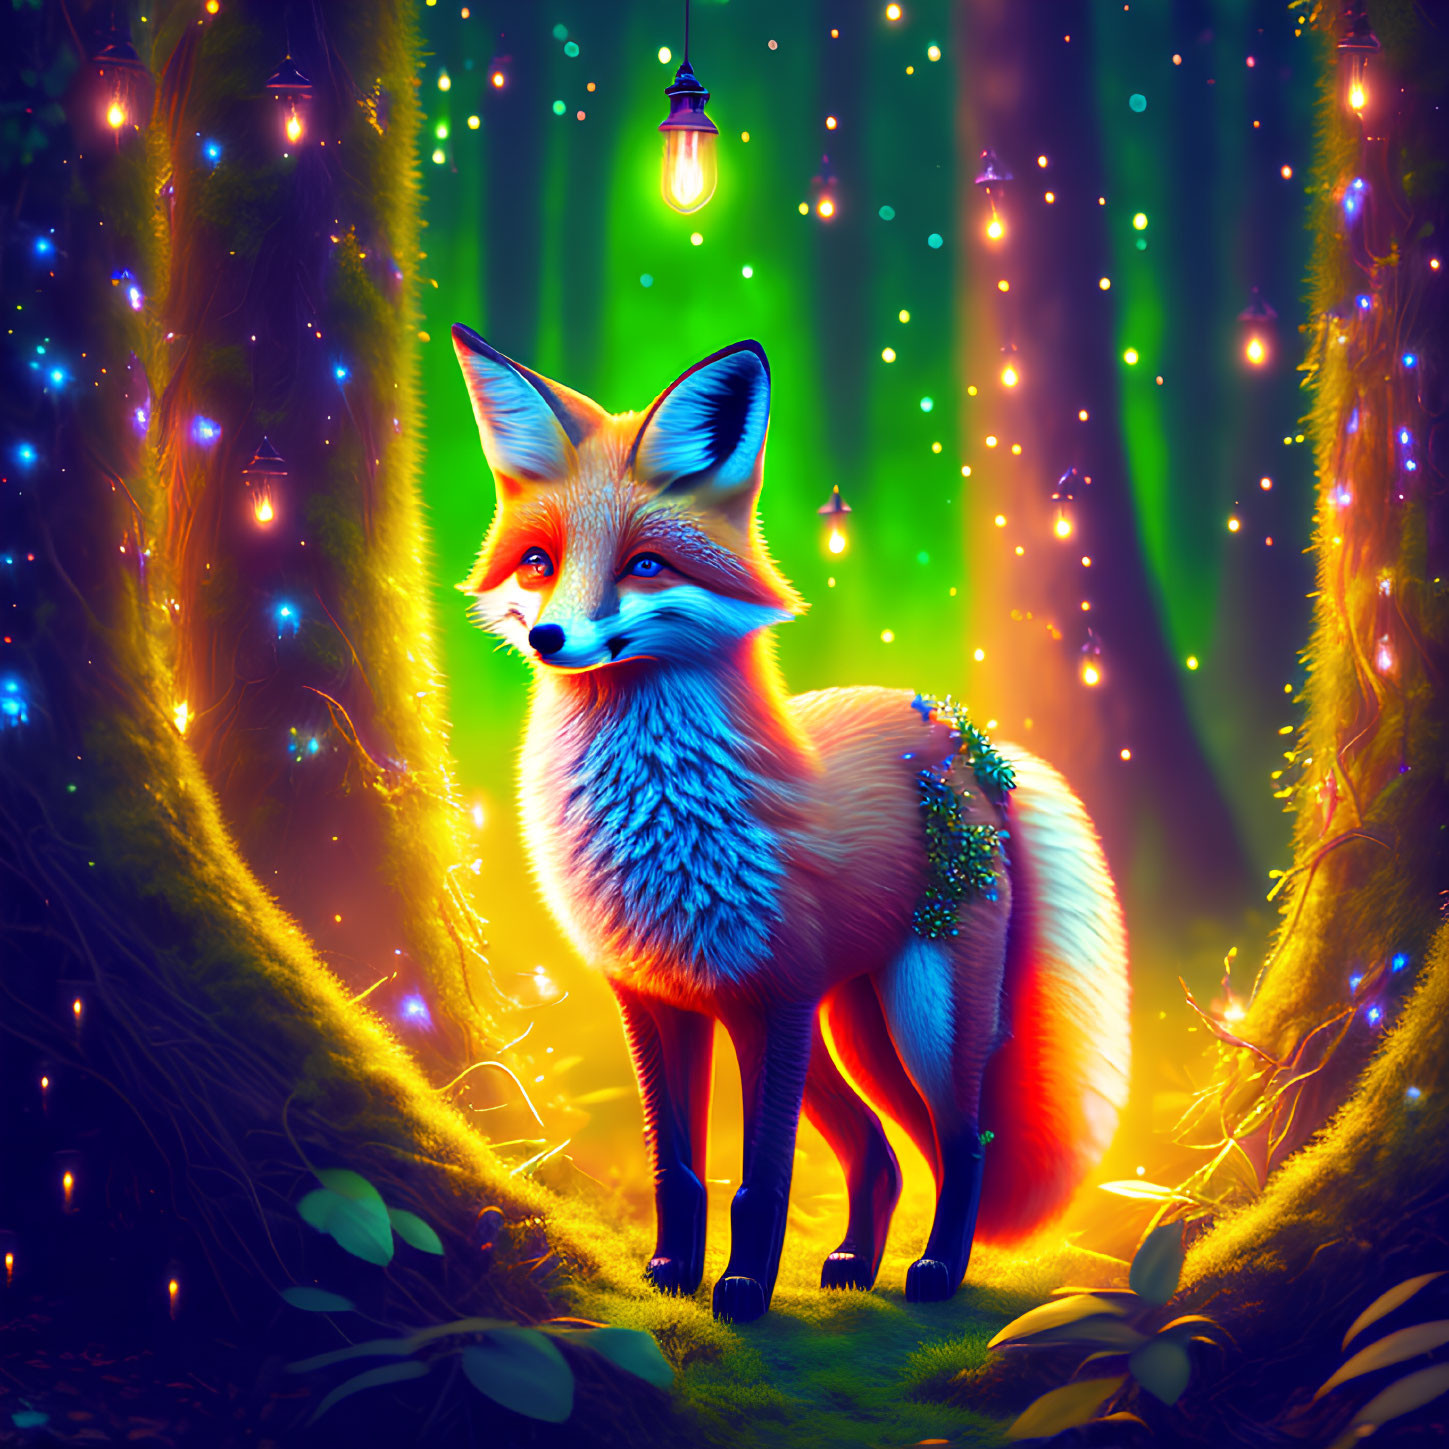 Colorful Fox in Enchanted Forest with Glowing Lanterns